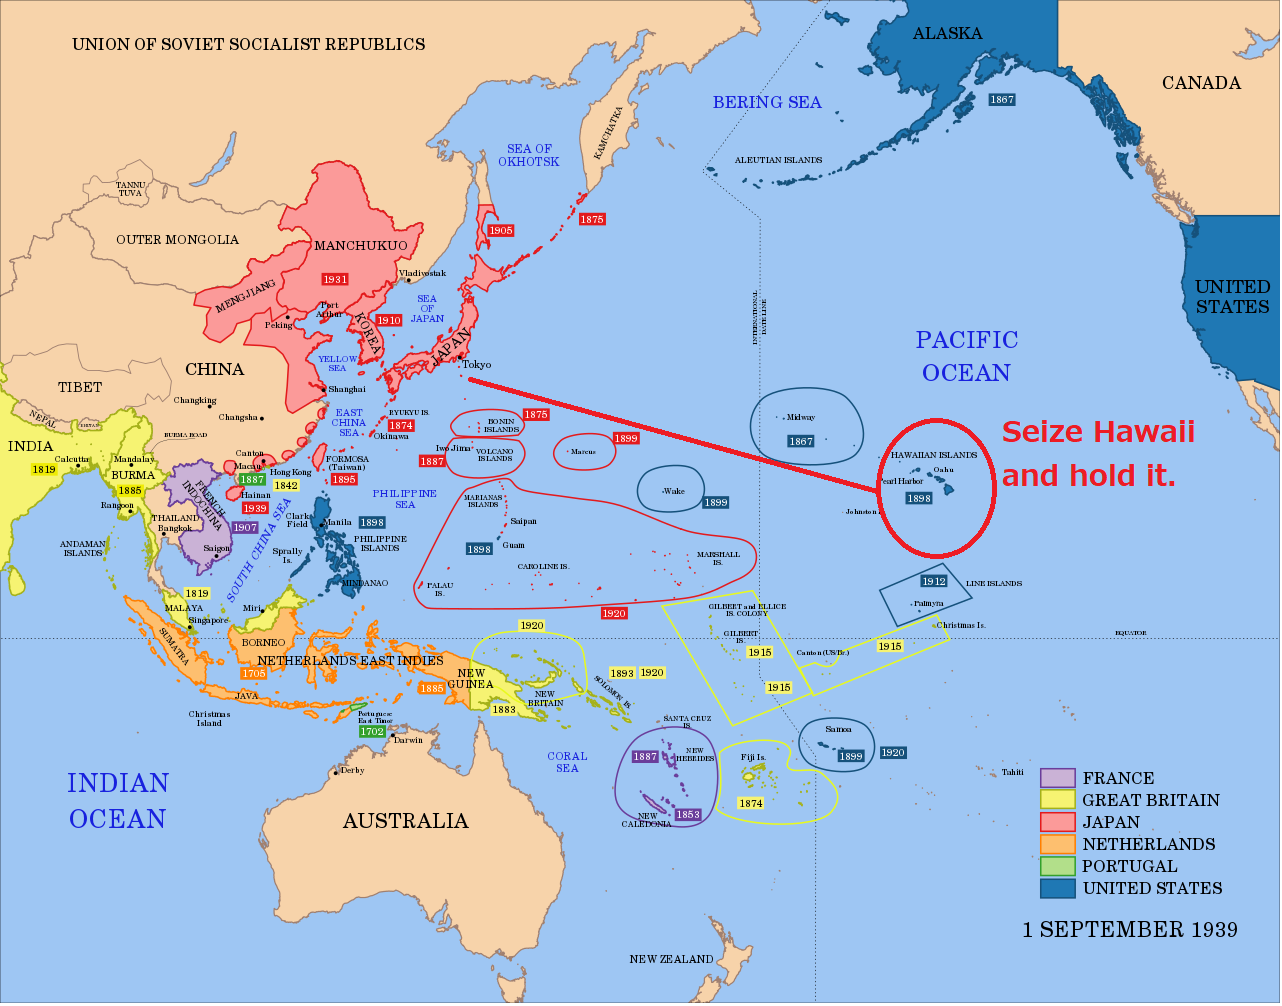 No Pearl Harbour raid. Victory for Japan? | Page 11 | alternatehistory.com